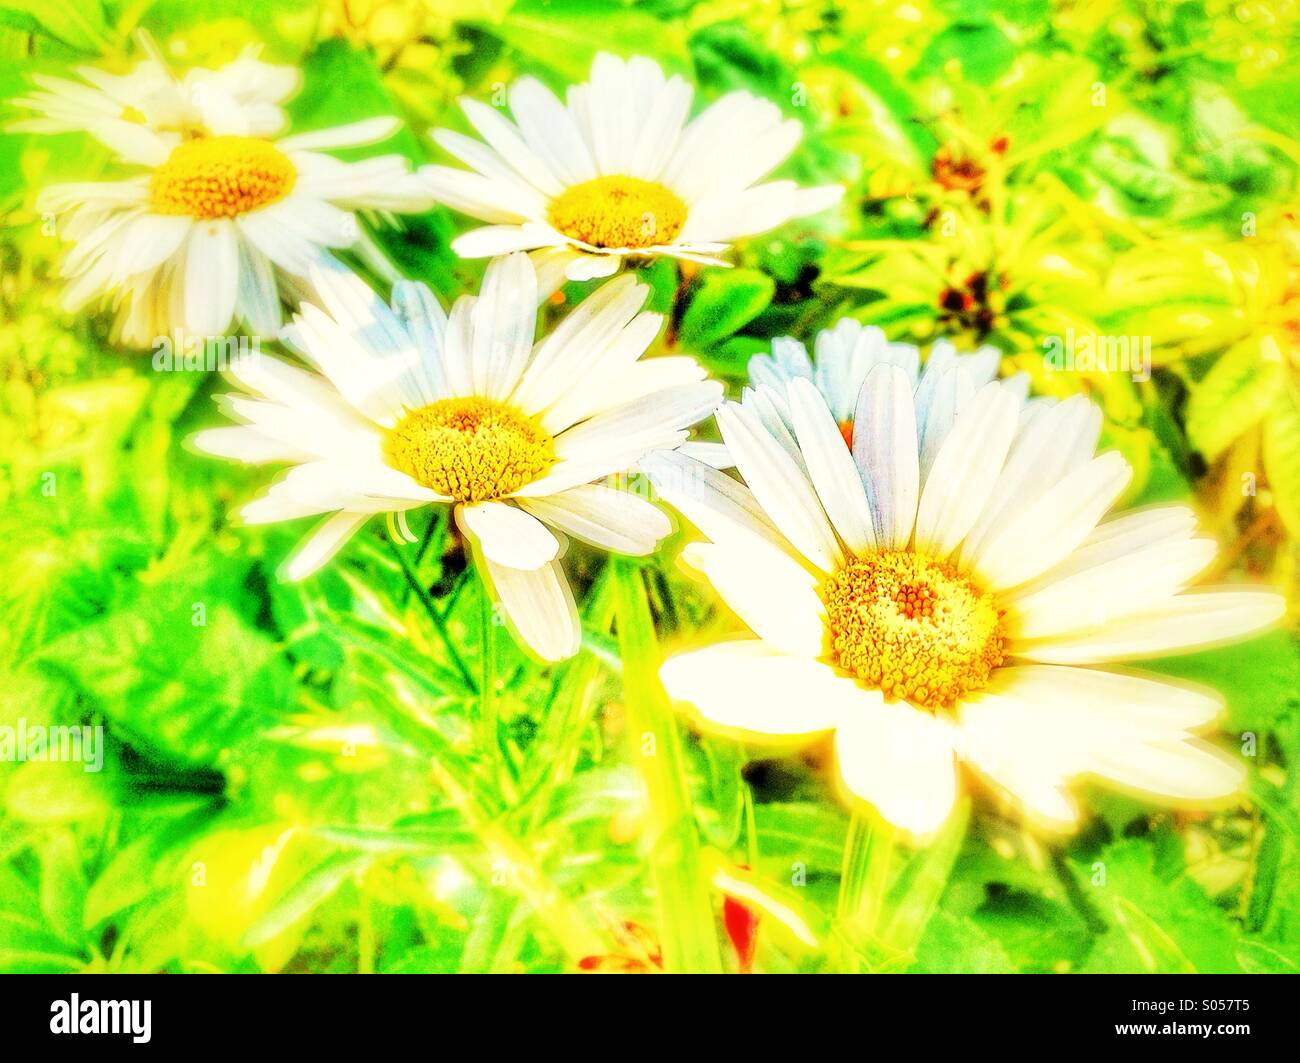 A field of daisies #2 Stock Photo